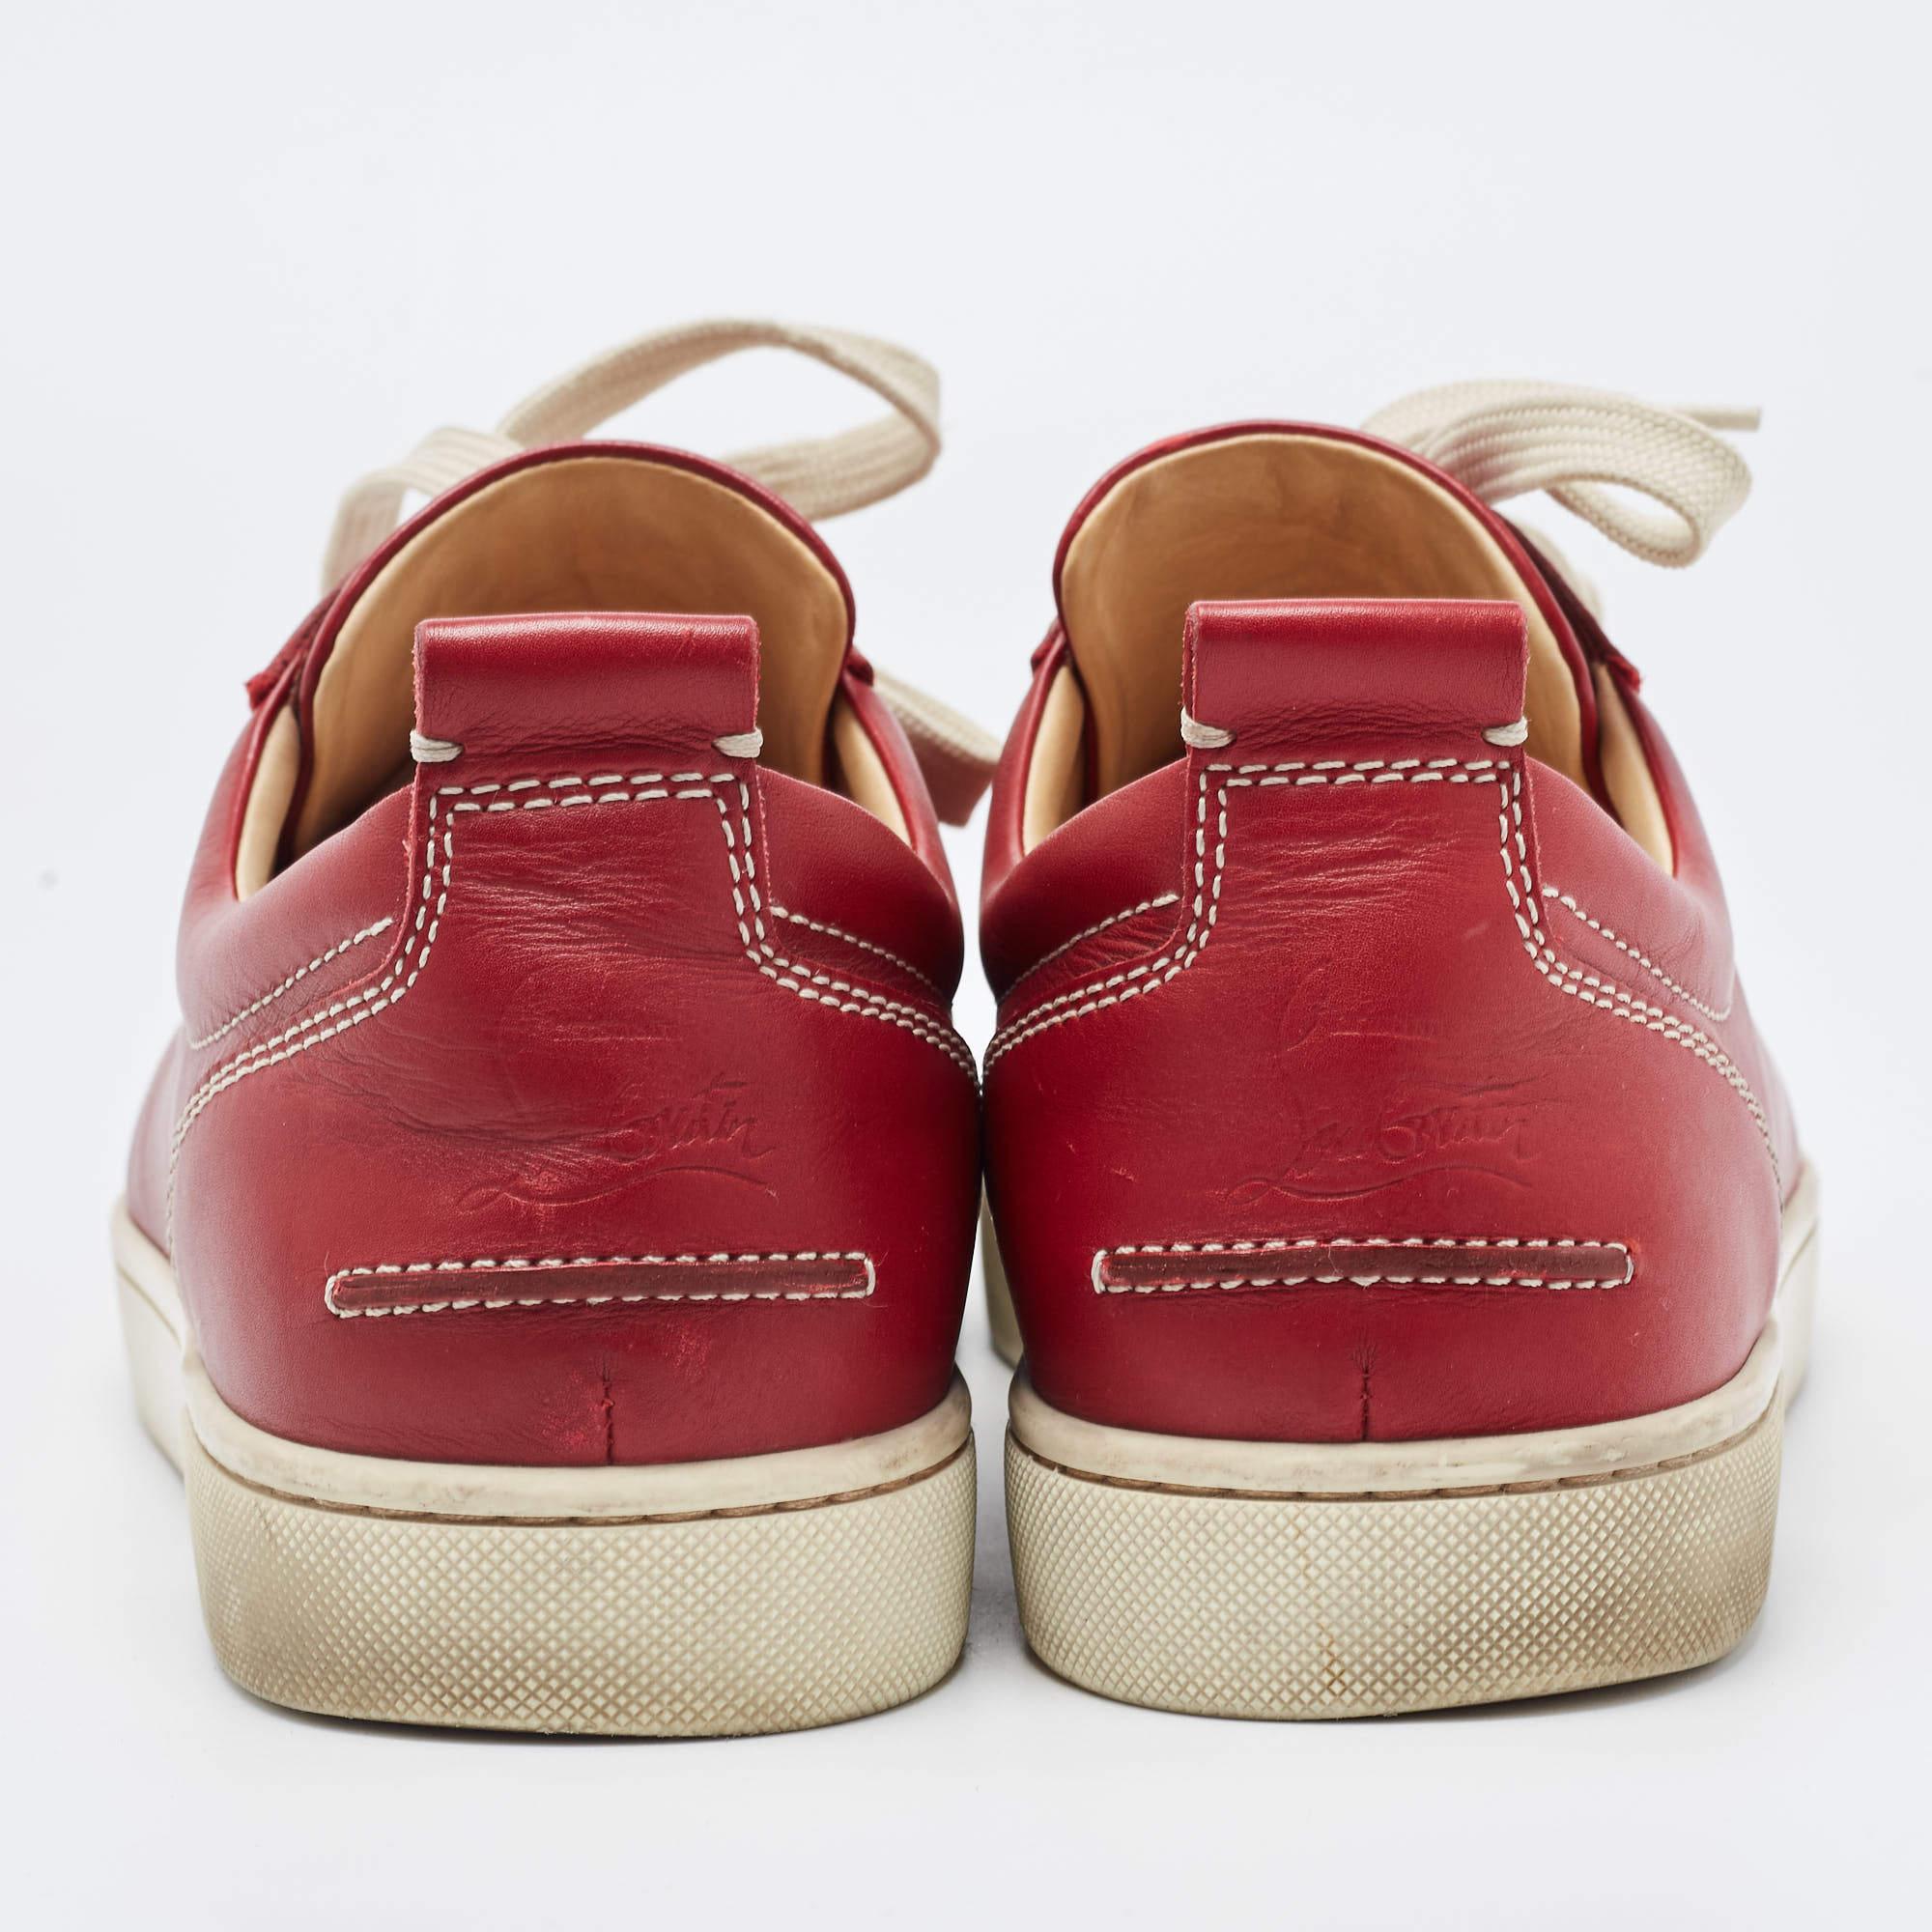 Christian Louboutin Red Leather Sneakers Size 42.5 2